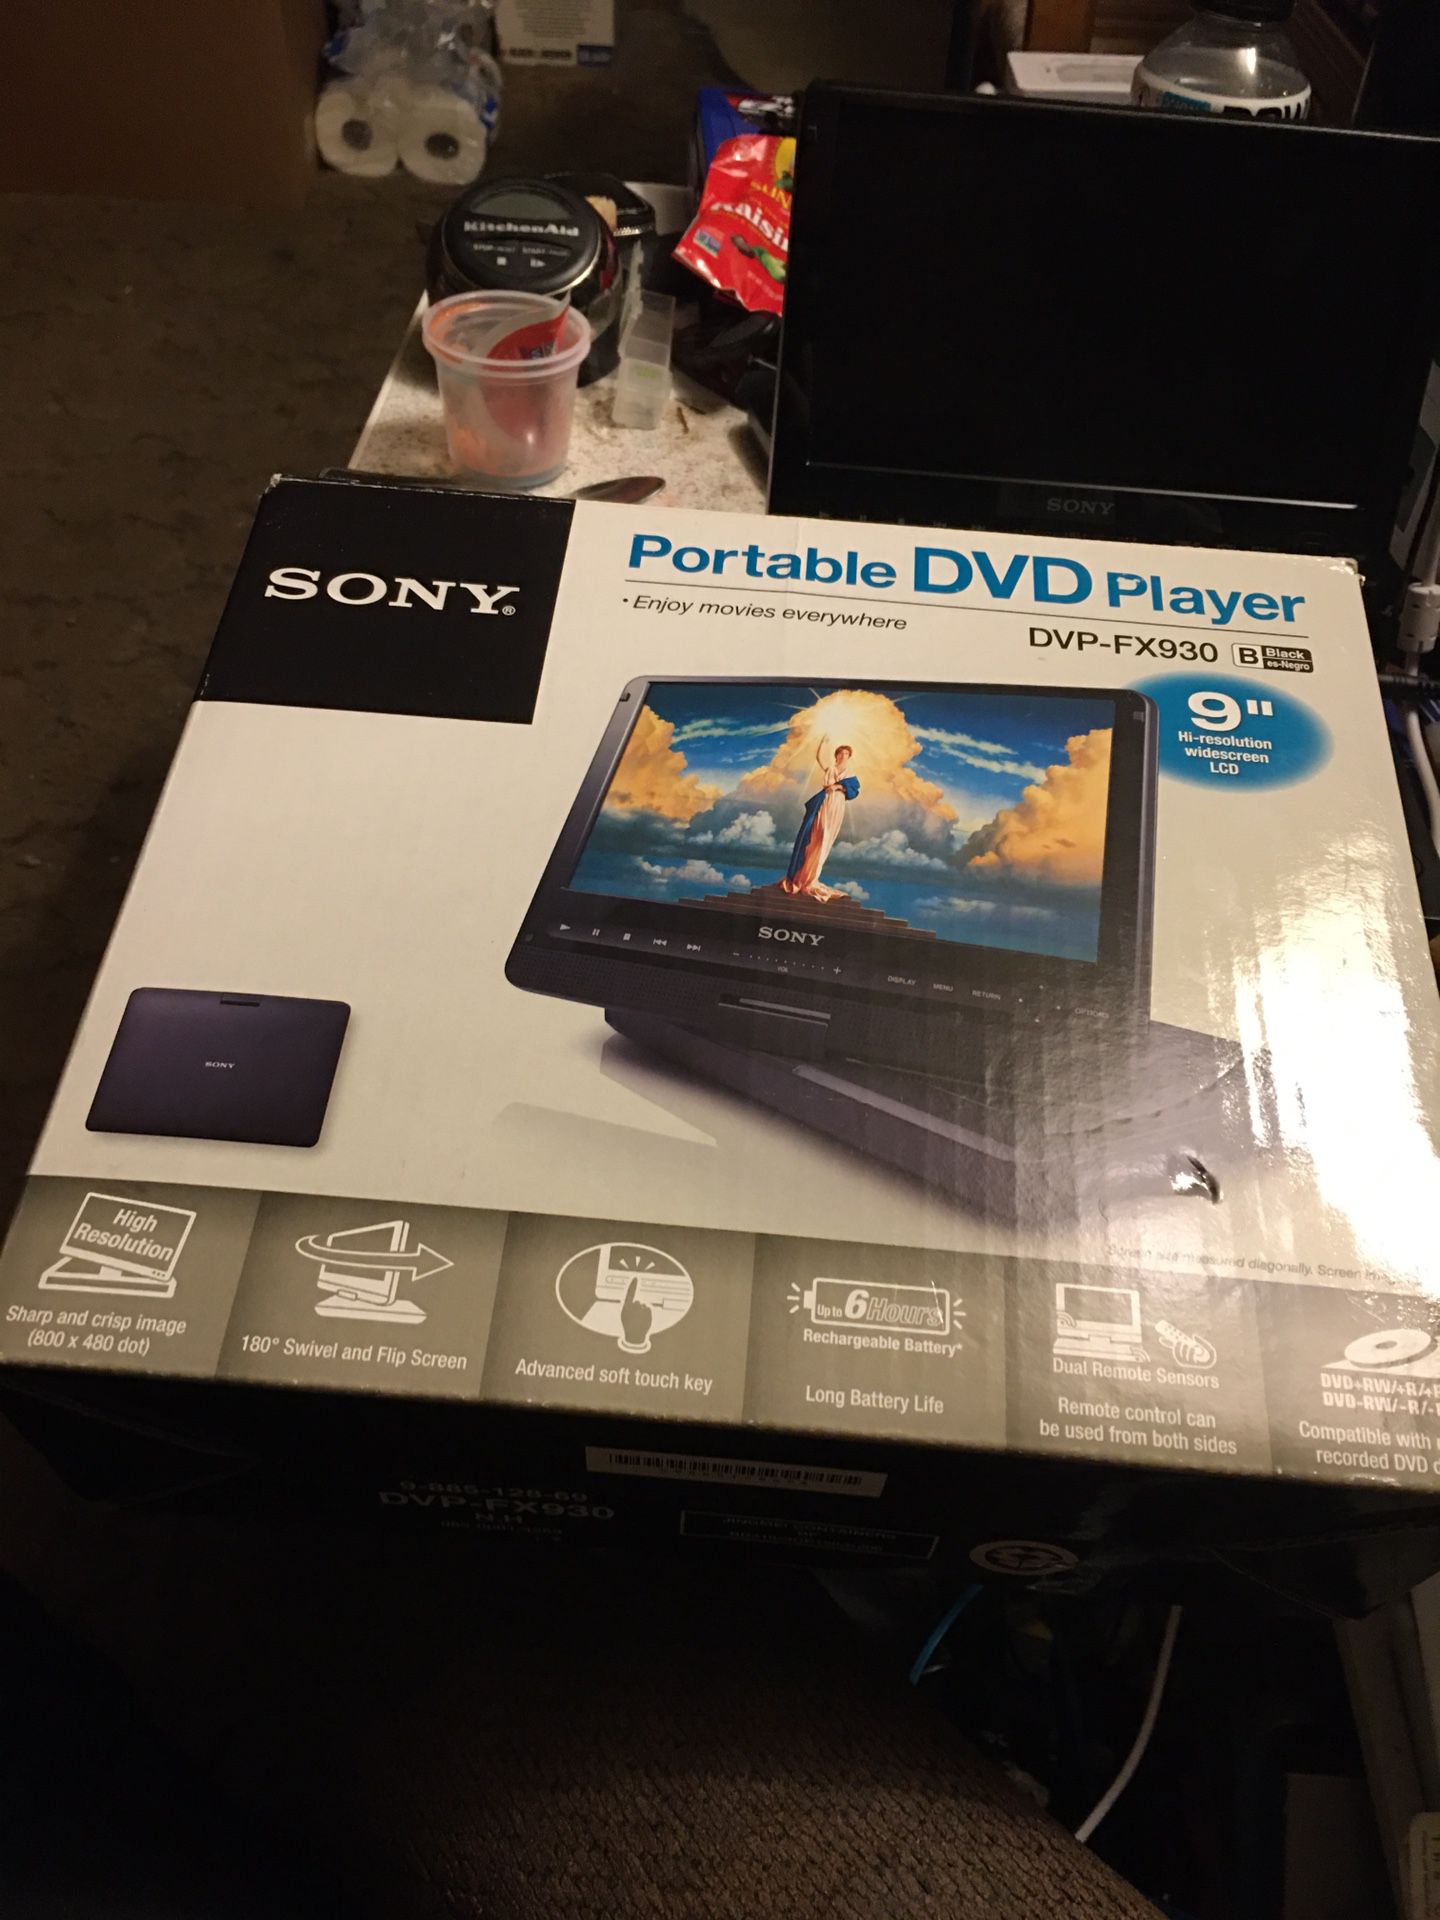 SONY Portable Dvd Player for Sale in Green Bay, WI - OfferUp